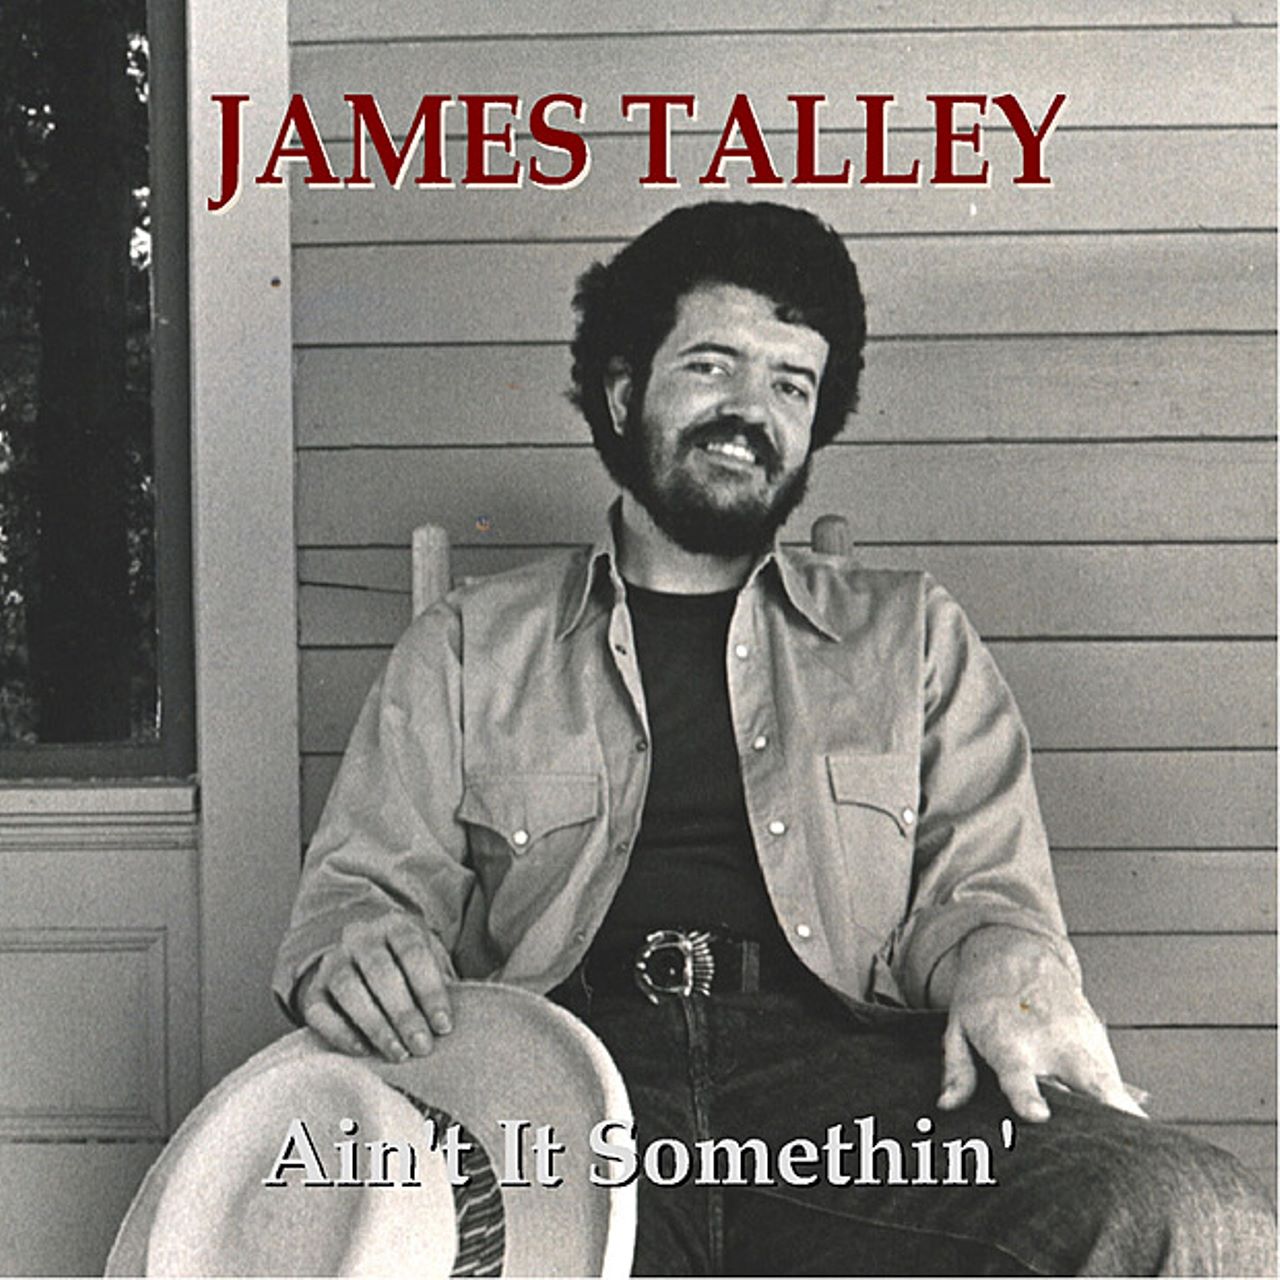 James Talley - Ain't It Somethin' cover album